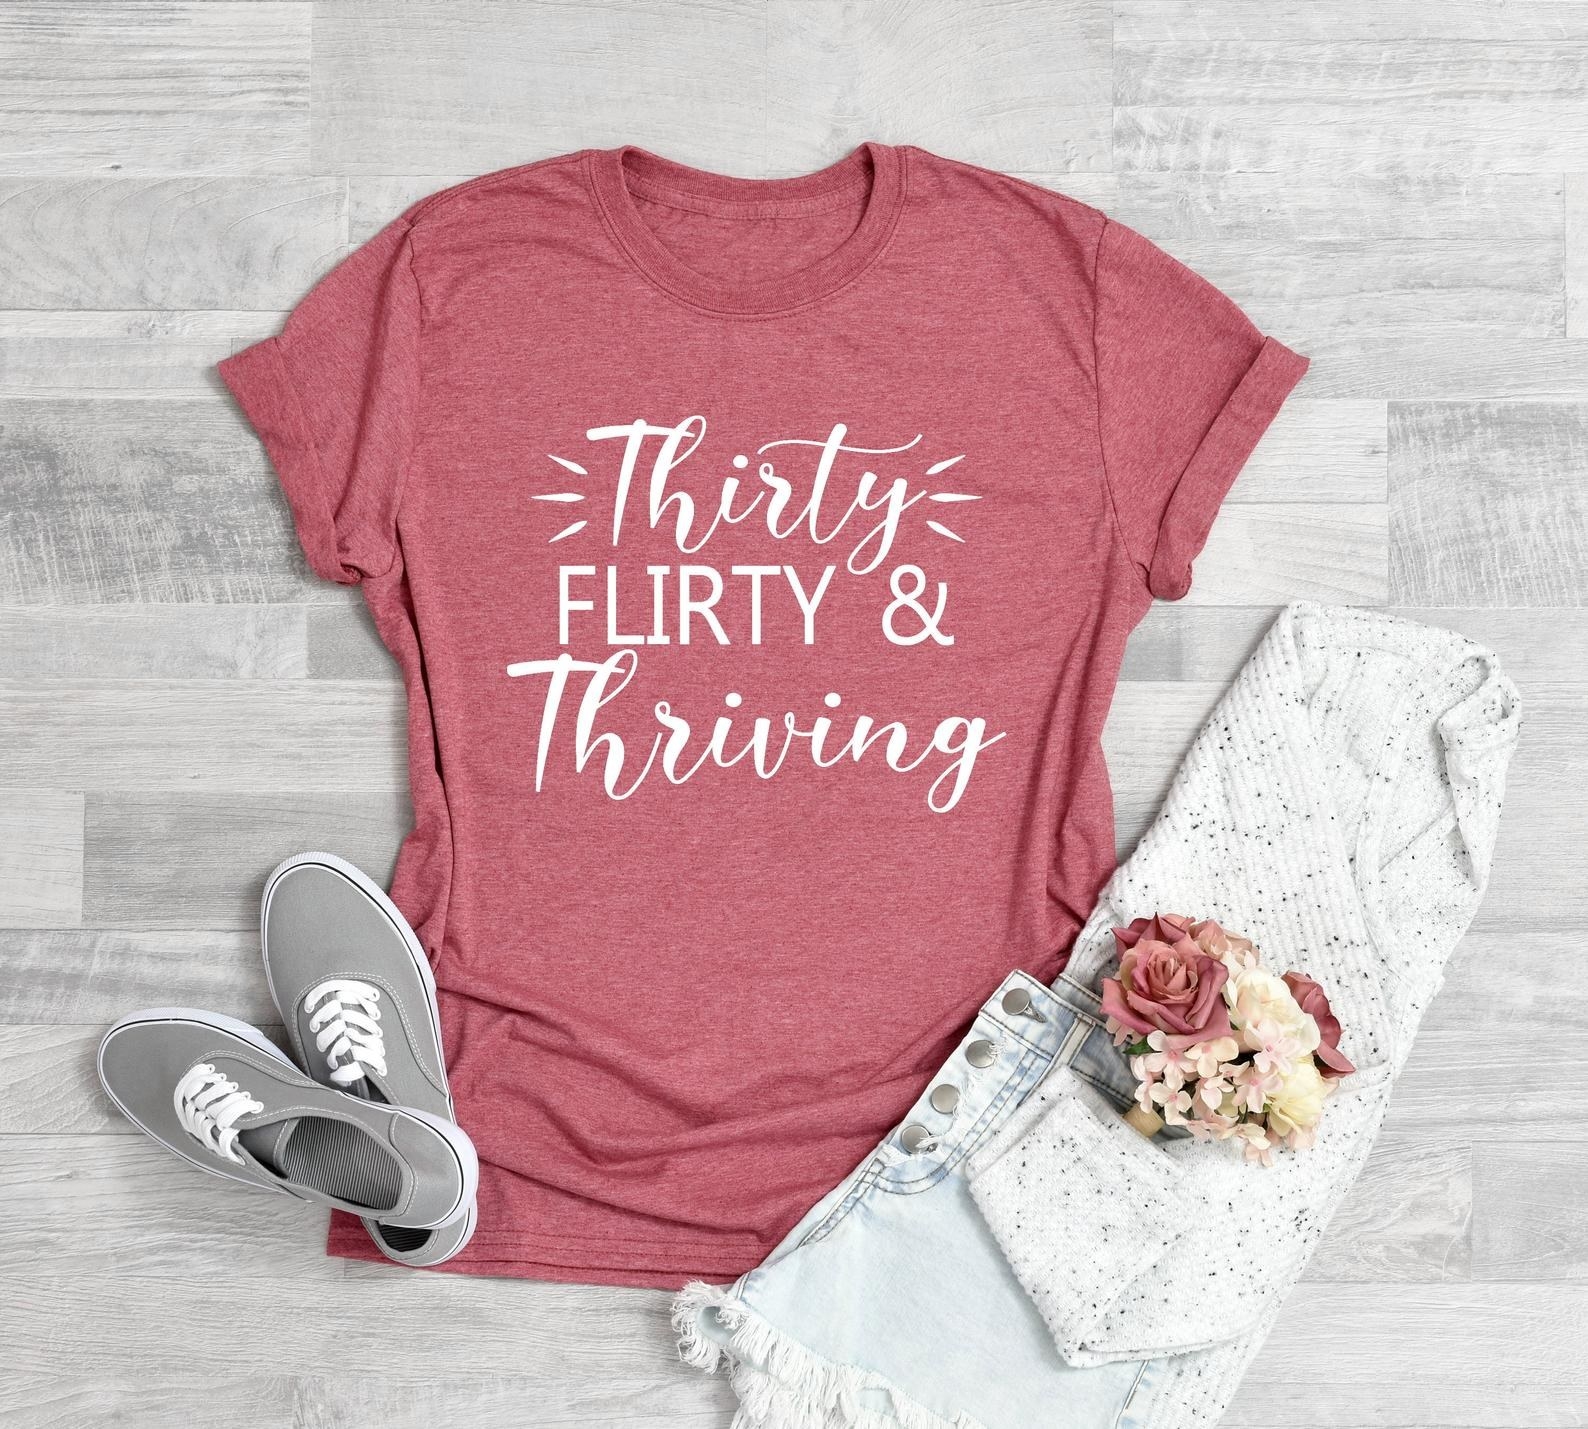 Coral pink T-shirt with words in white 